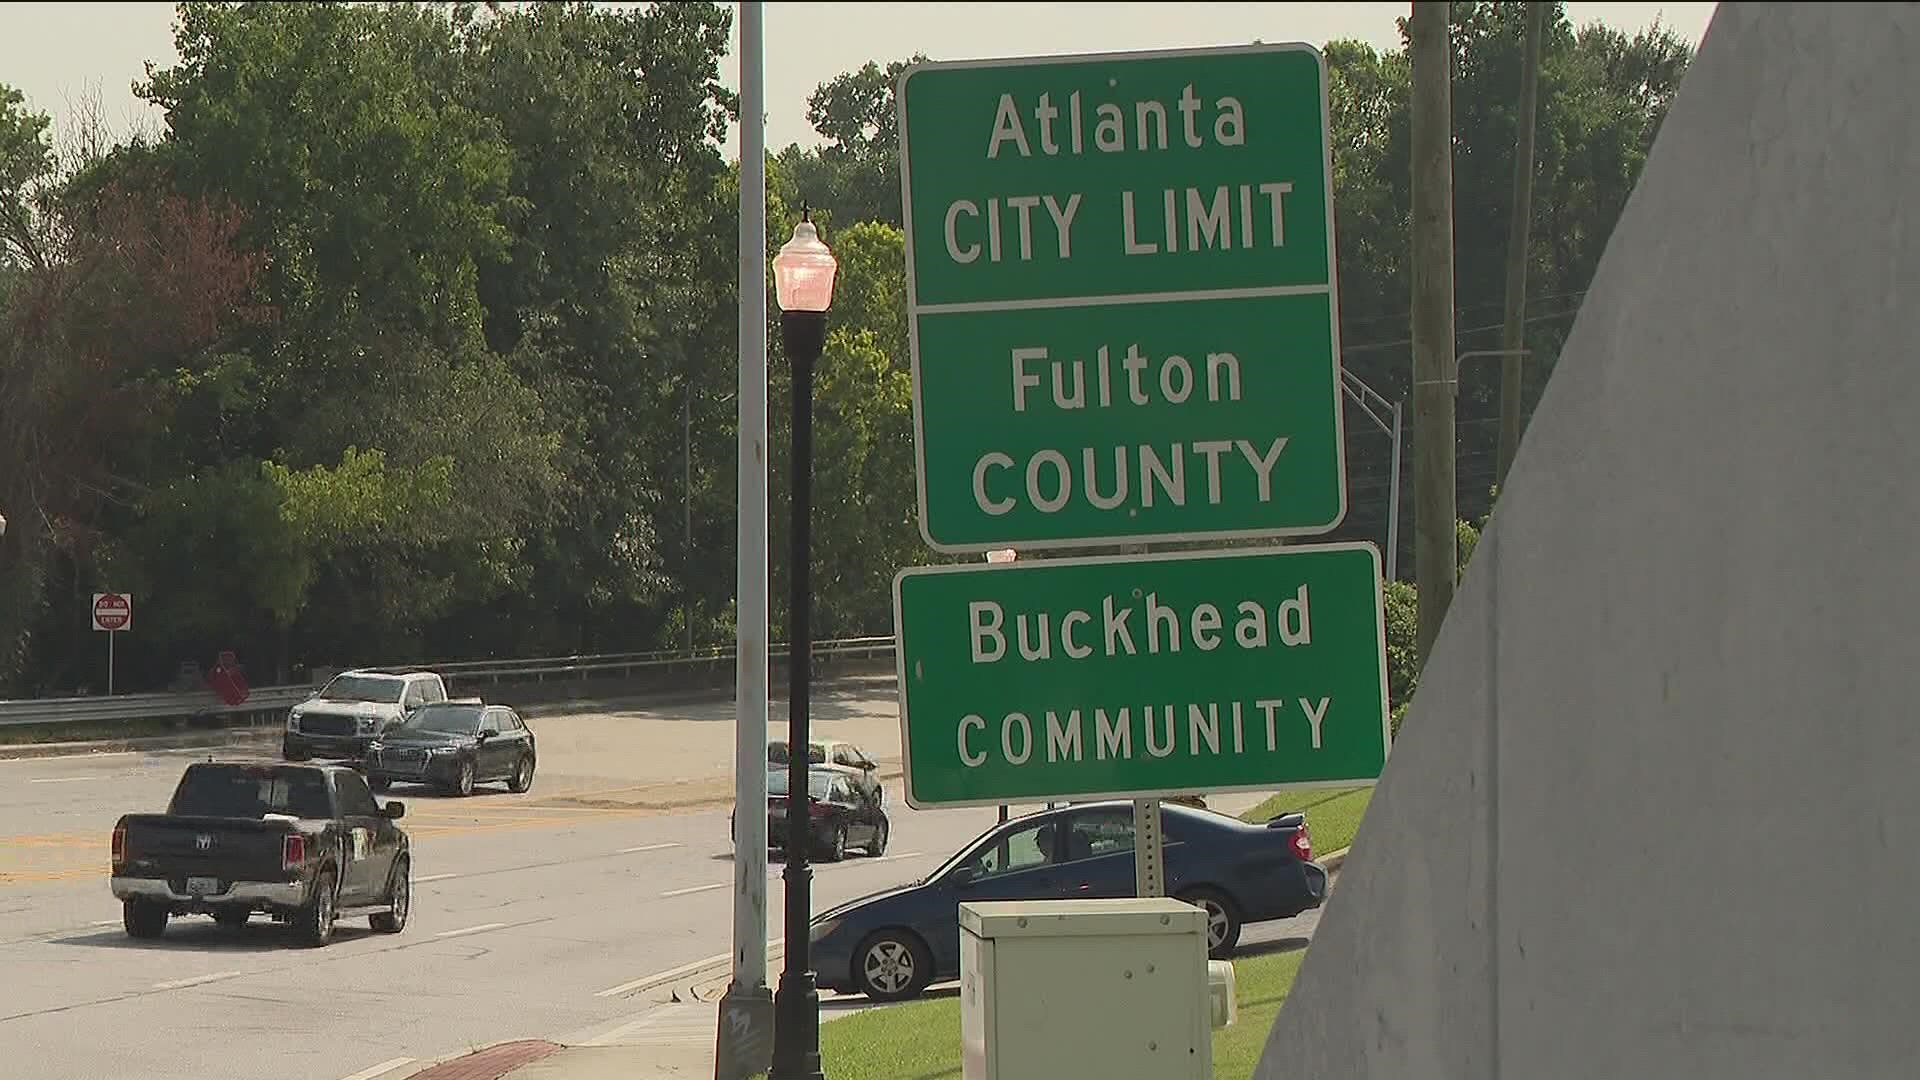 Buckhead City Committee said the advisory question was recently approved.